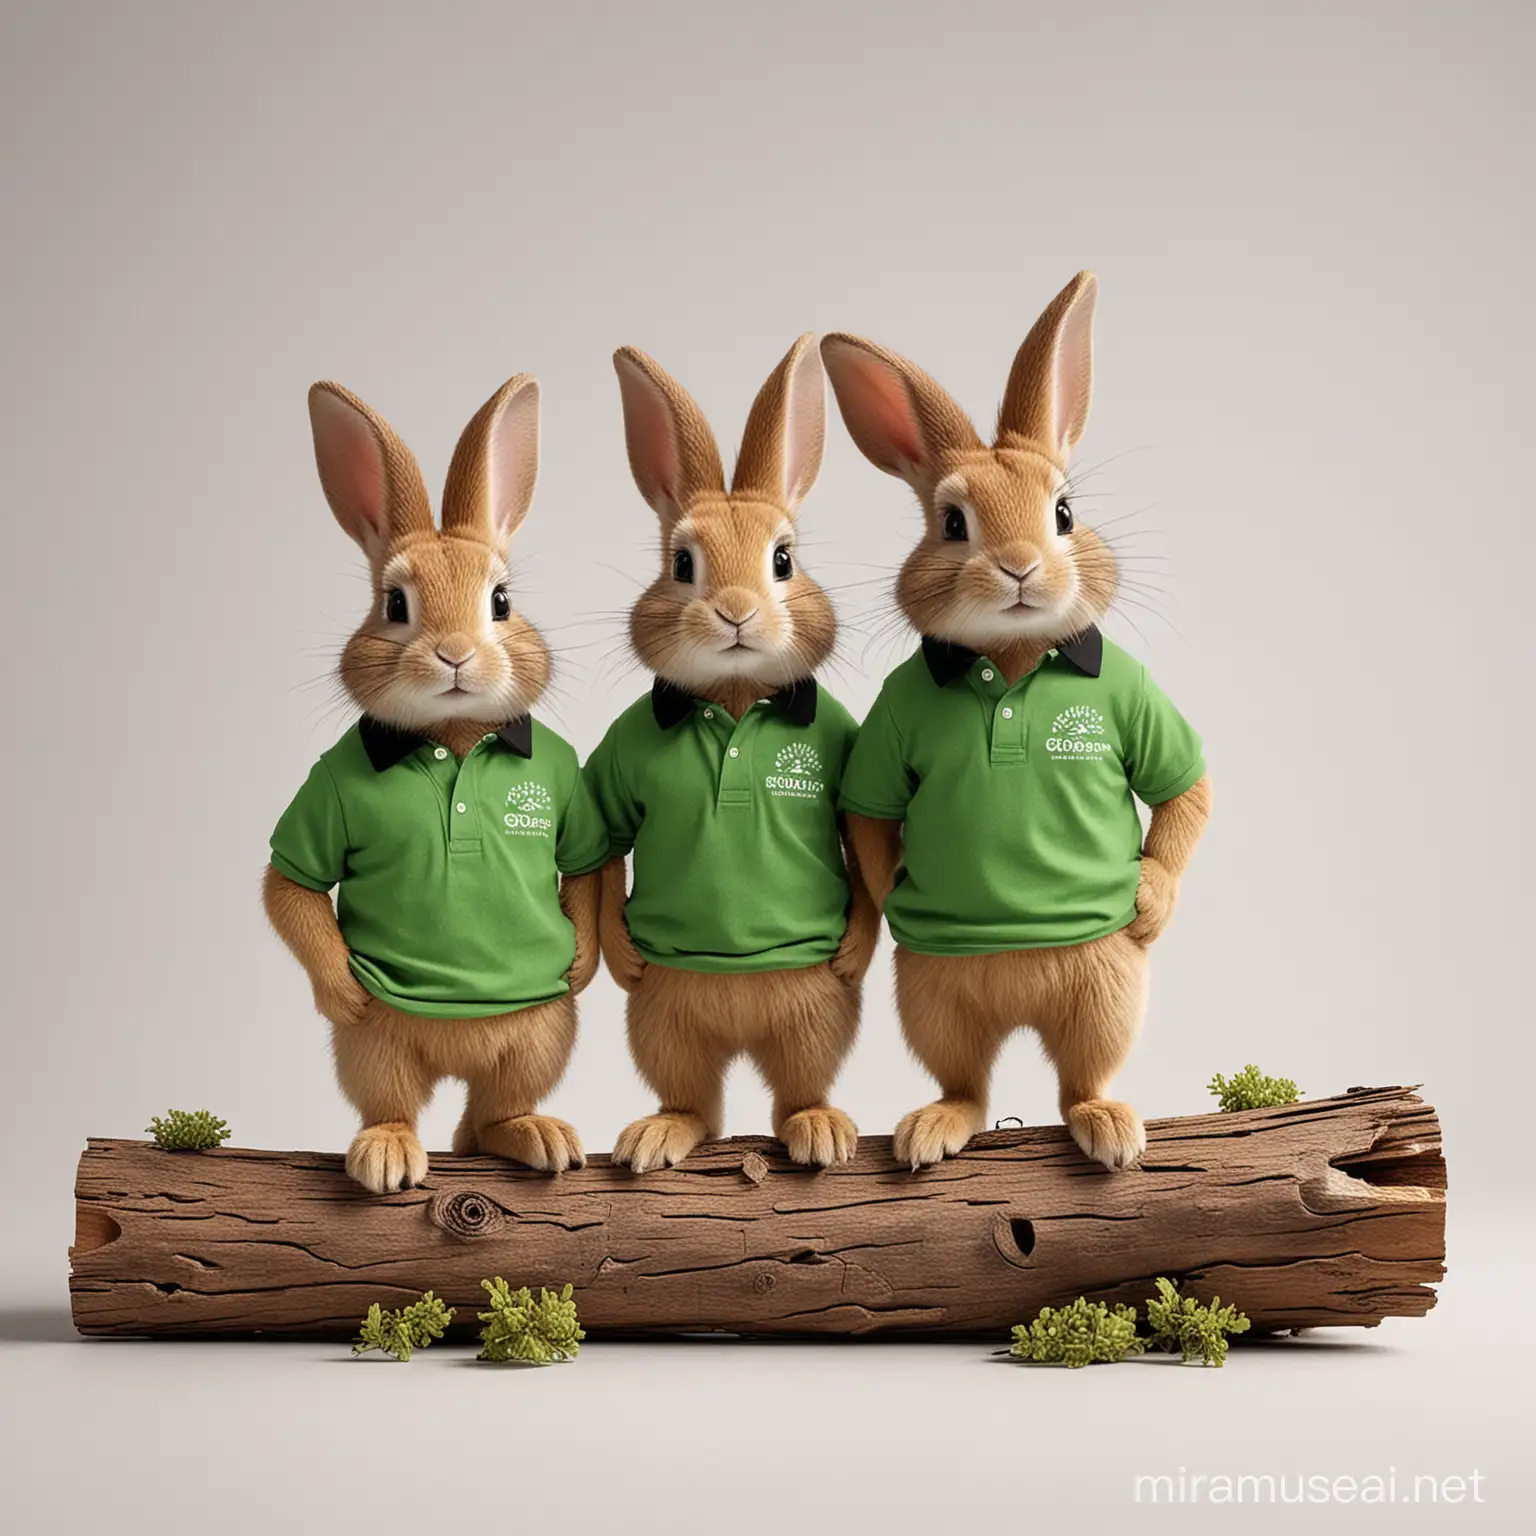 Group of Rabbits in Green Polo Shirts Amidst Forest Logs with Space for Logo and Headline